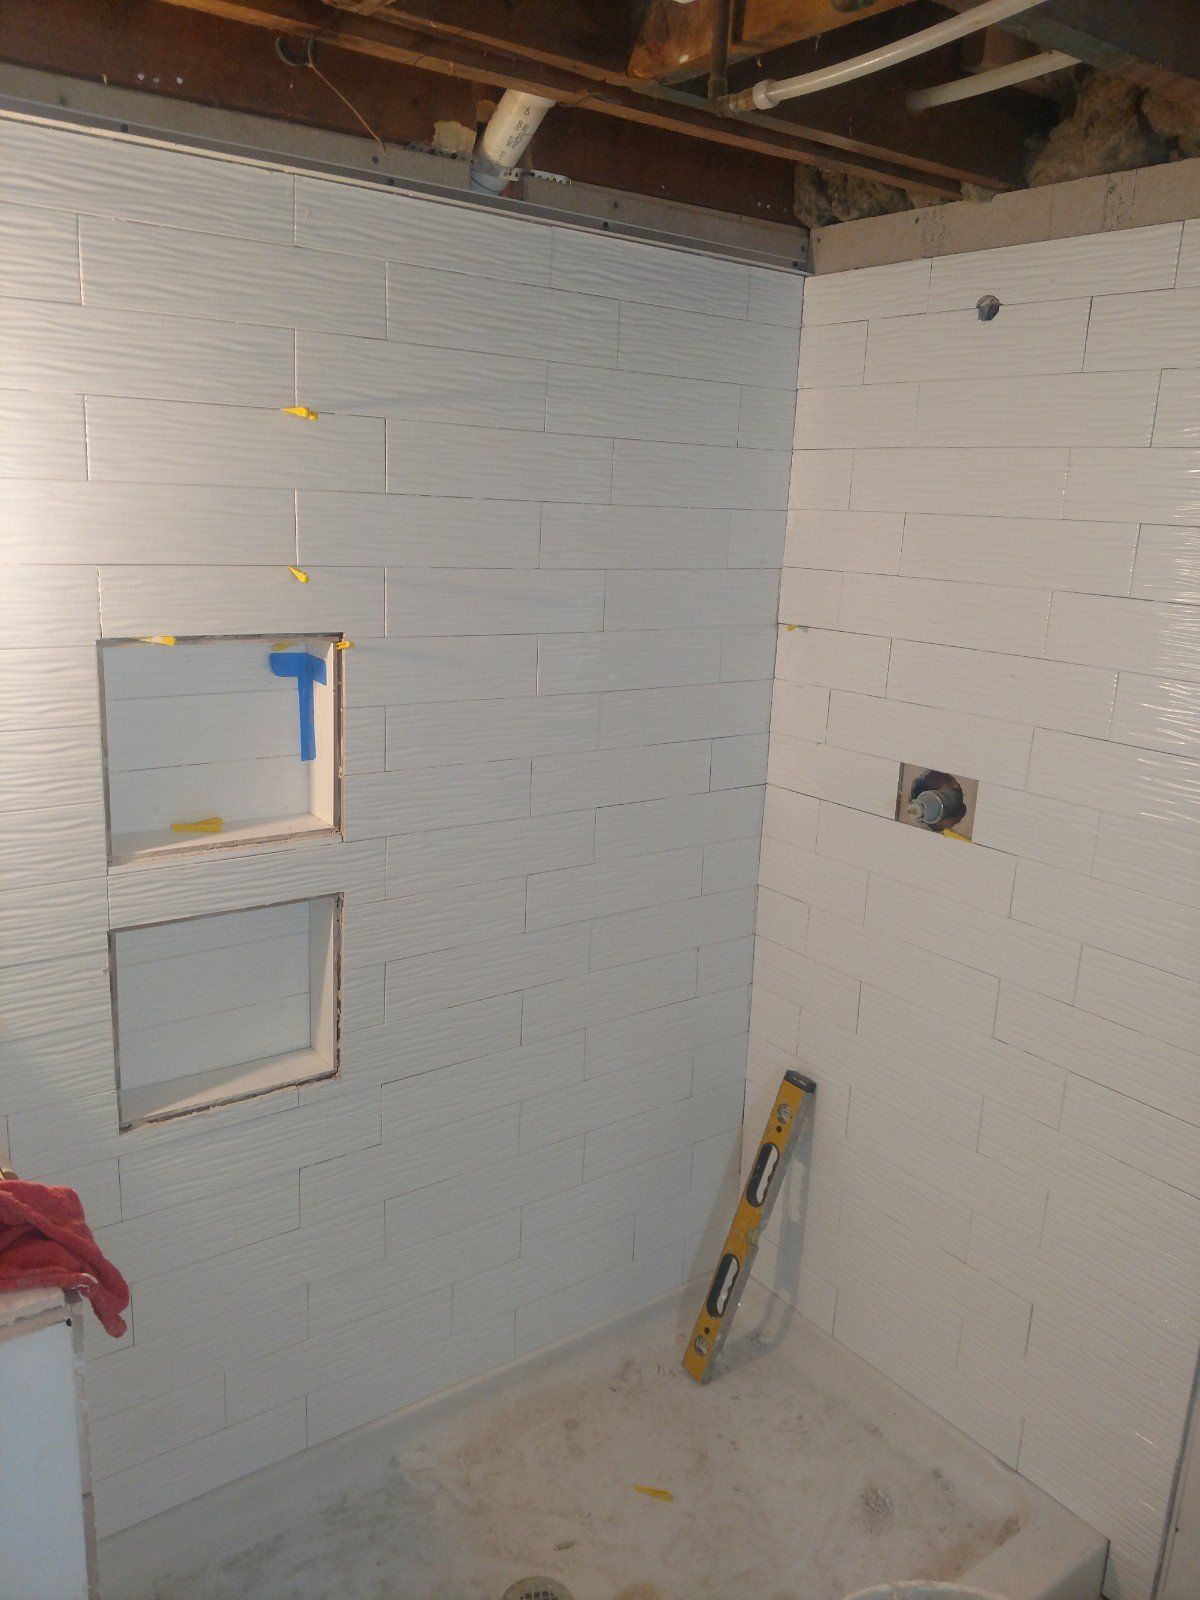 Restroom Renovation — Fixing Cladding wall in Allenstown, NH